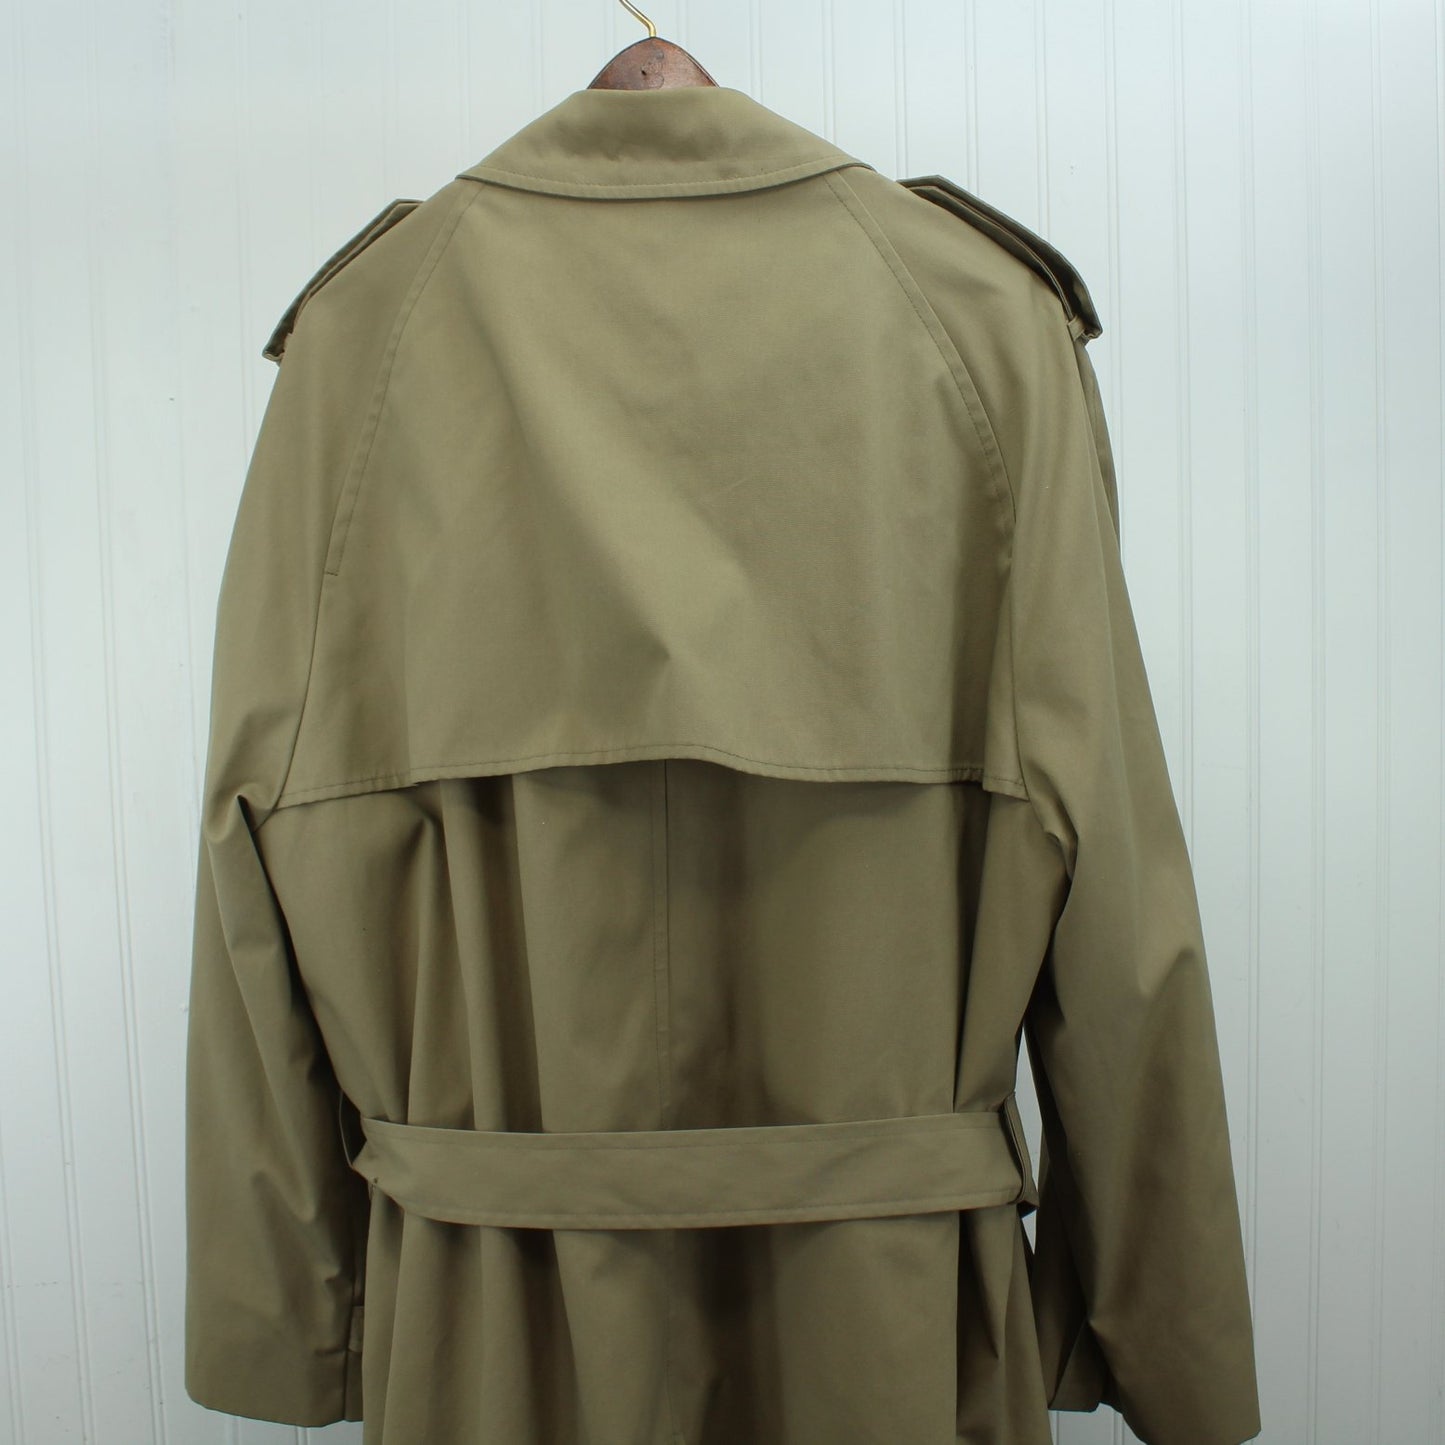 London Fog Trench Coat Men's 46L Dbl Breast Removable Thinsulate Lining back shoulder view